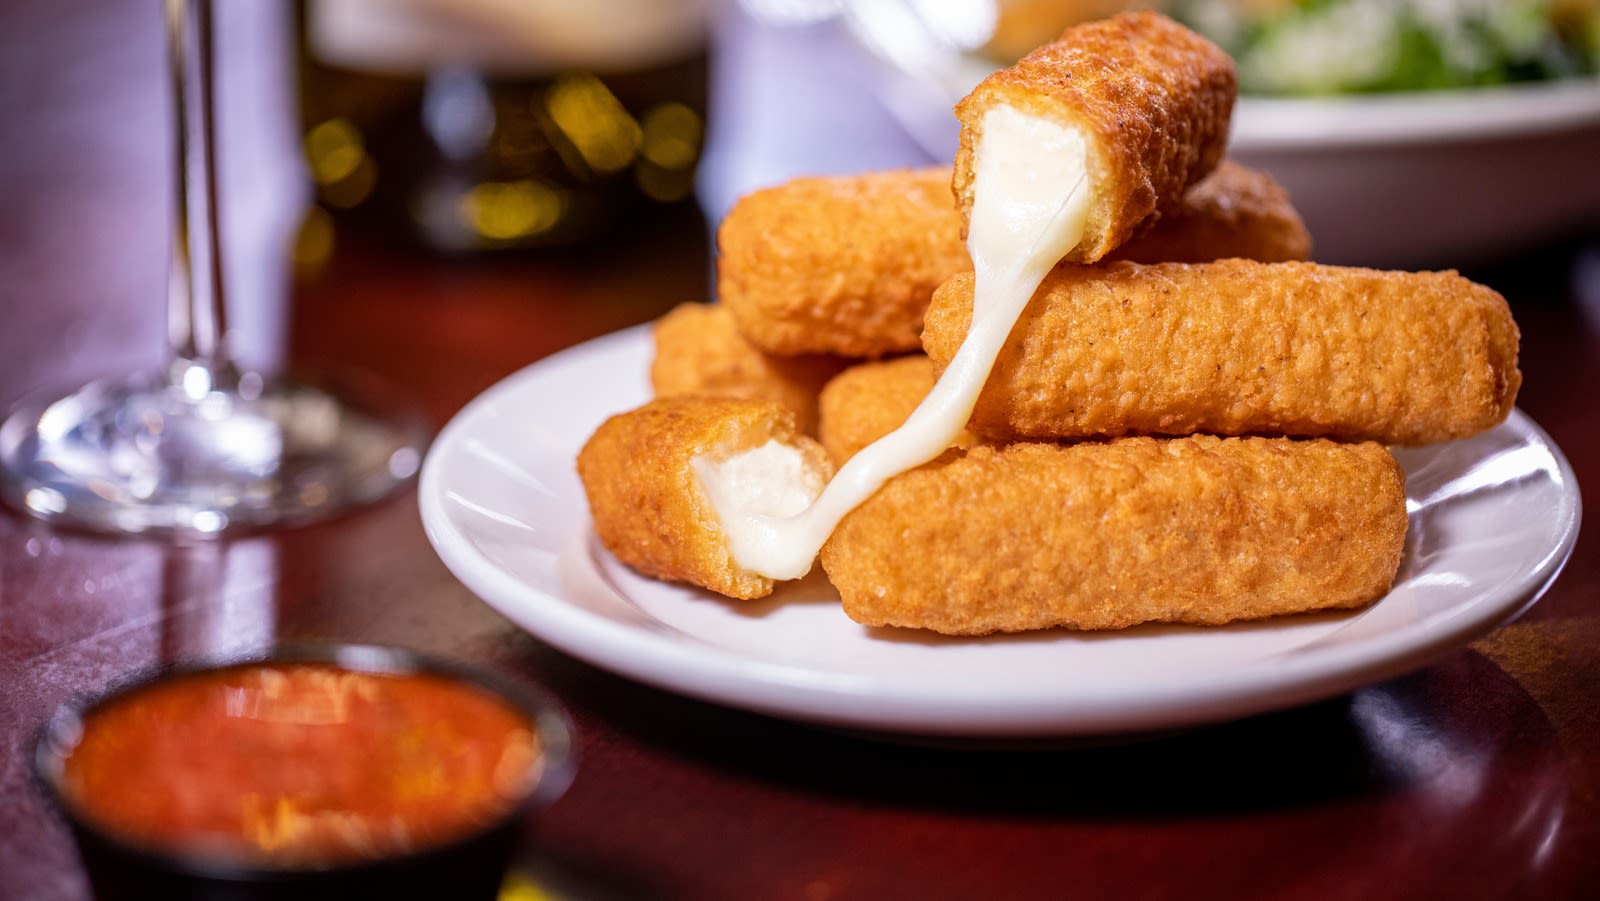 The Best Mozzarella Sticks In The US, According To Online Reviews